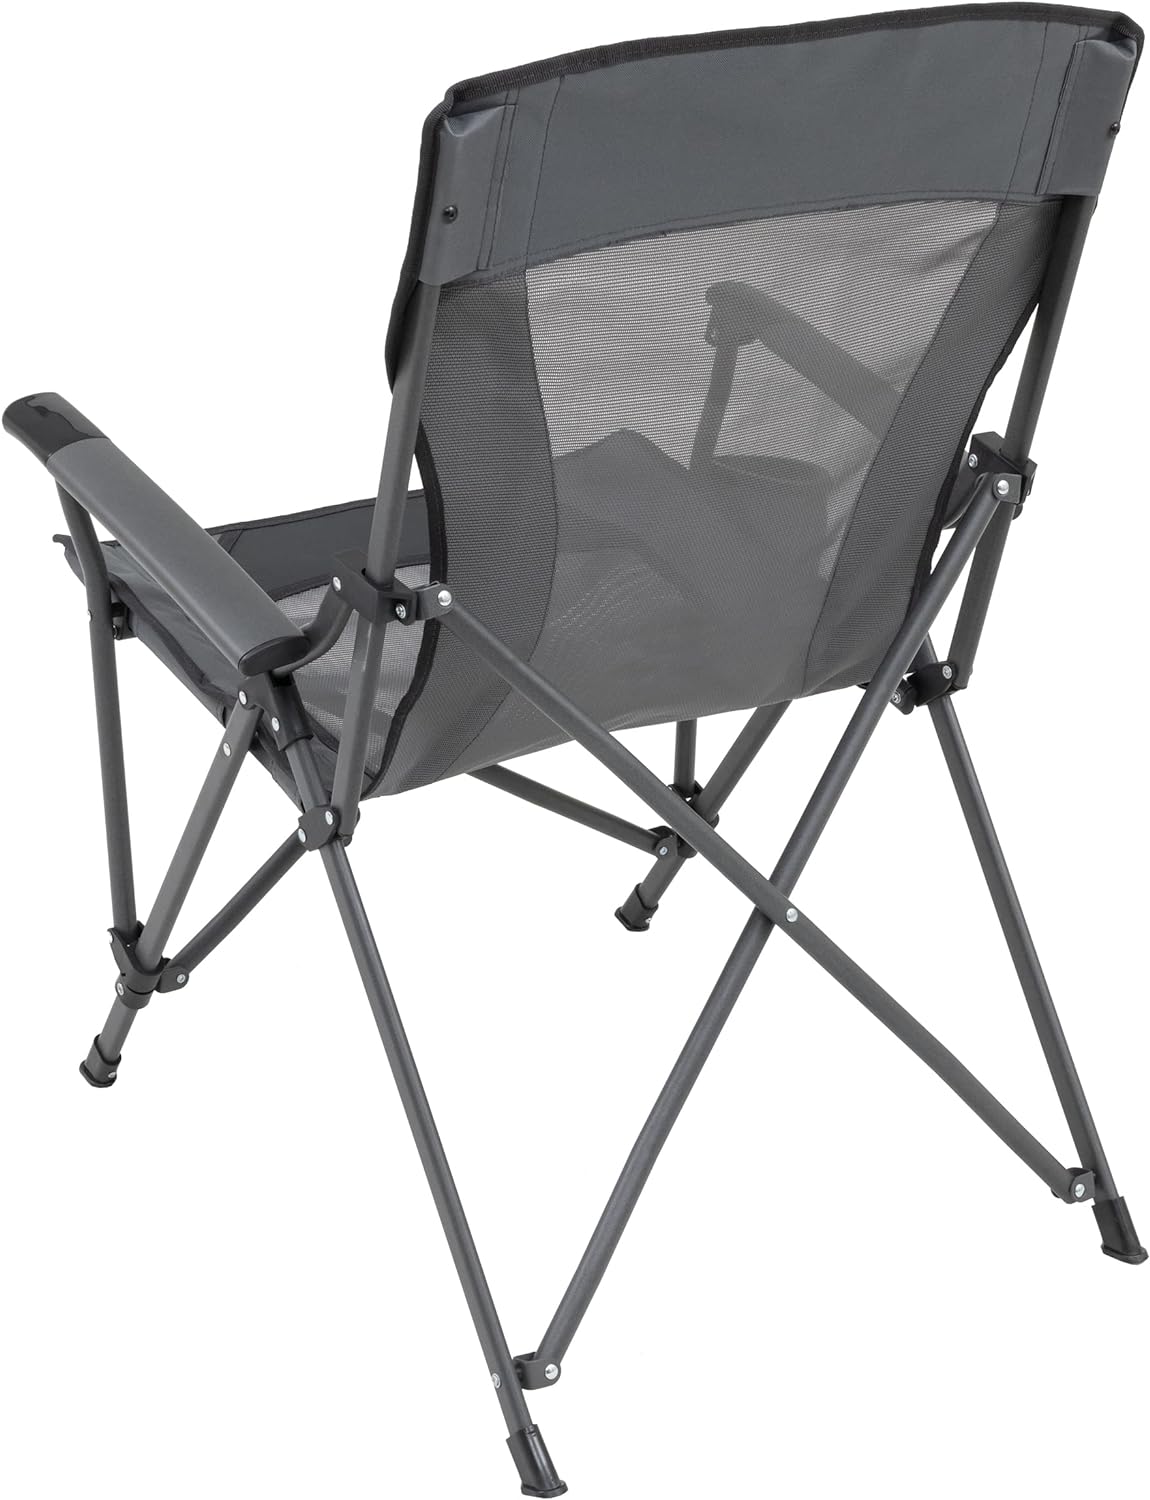 Browning Folding Camping Chairs for Adults - Durable Mesh Fabric Over Sturdy Powder Coated Steel Frame, Armrests Cup Holder, and Shoulder Carry Bag